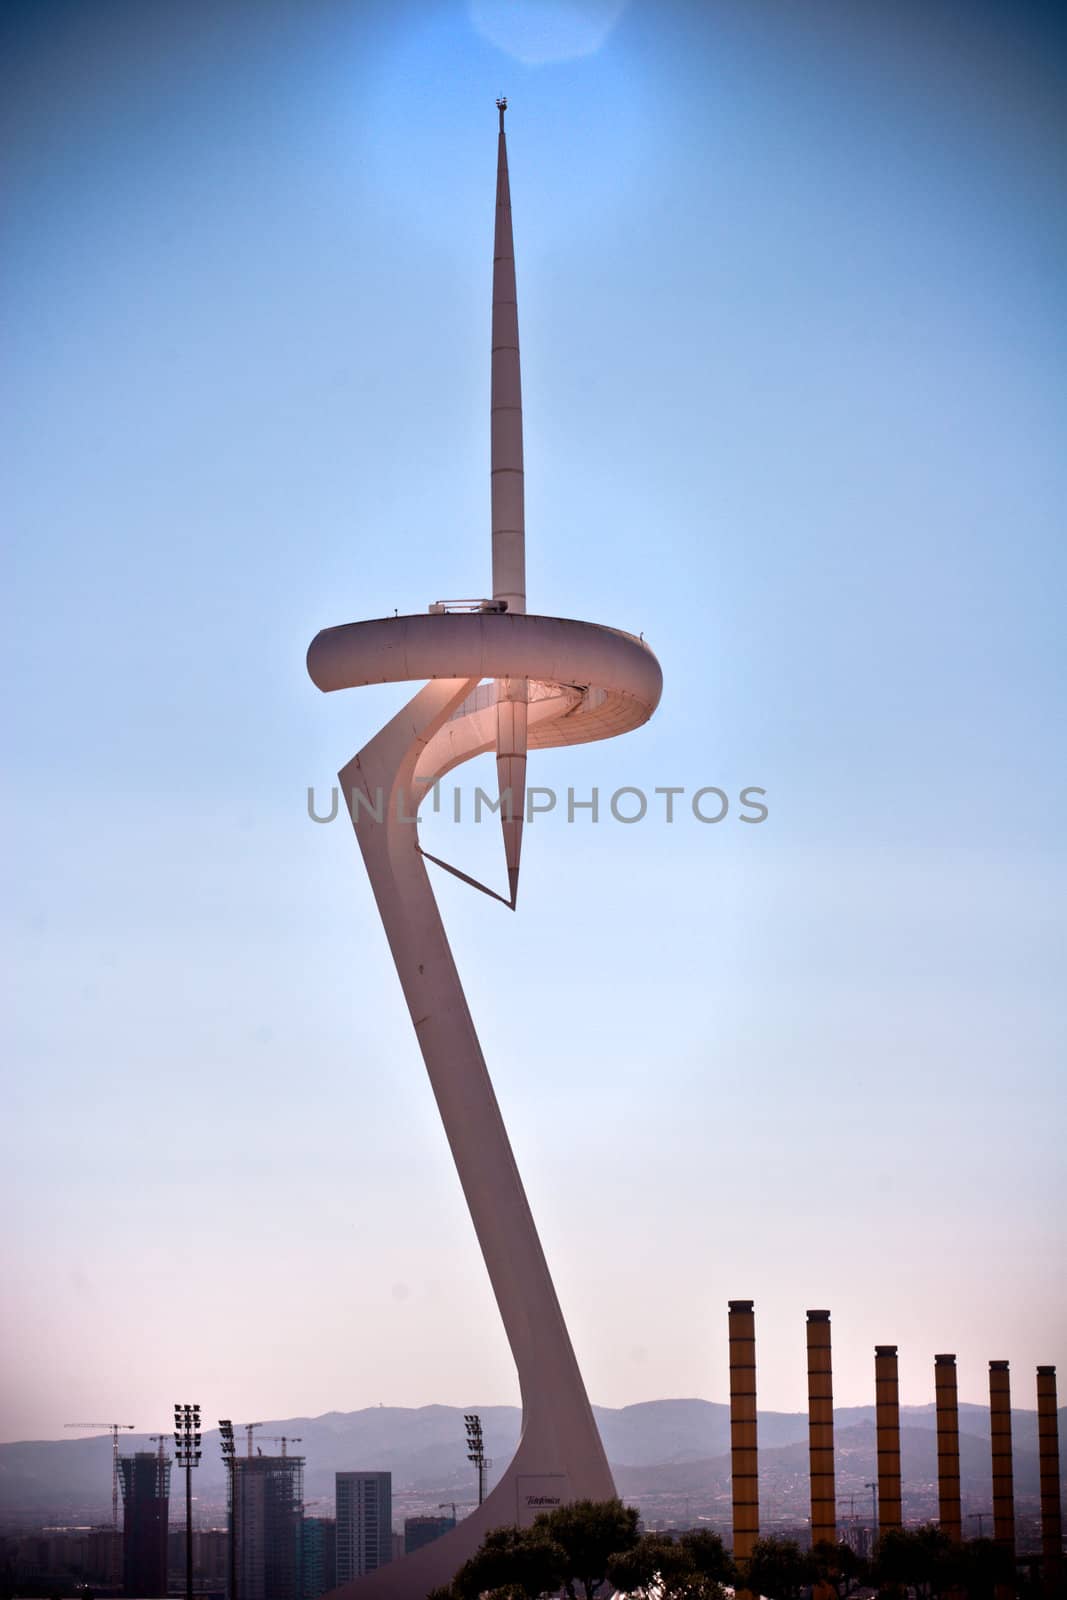 The Montjuïc Communications Tower by jrstock